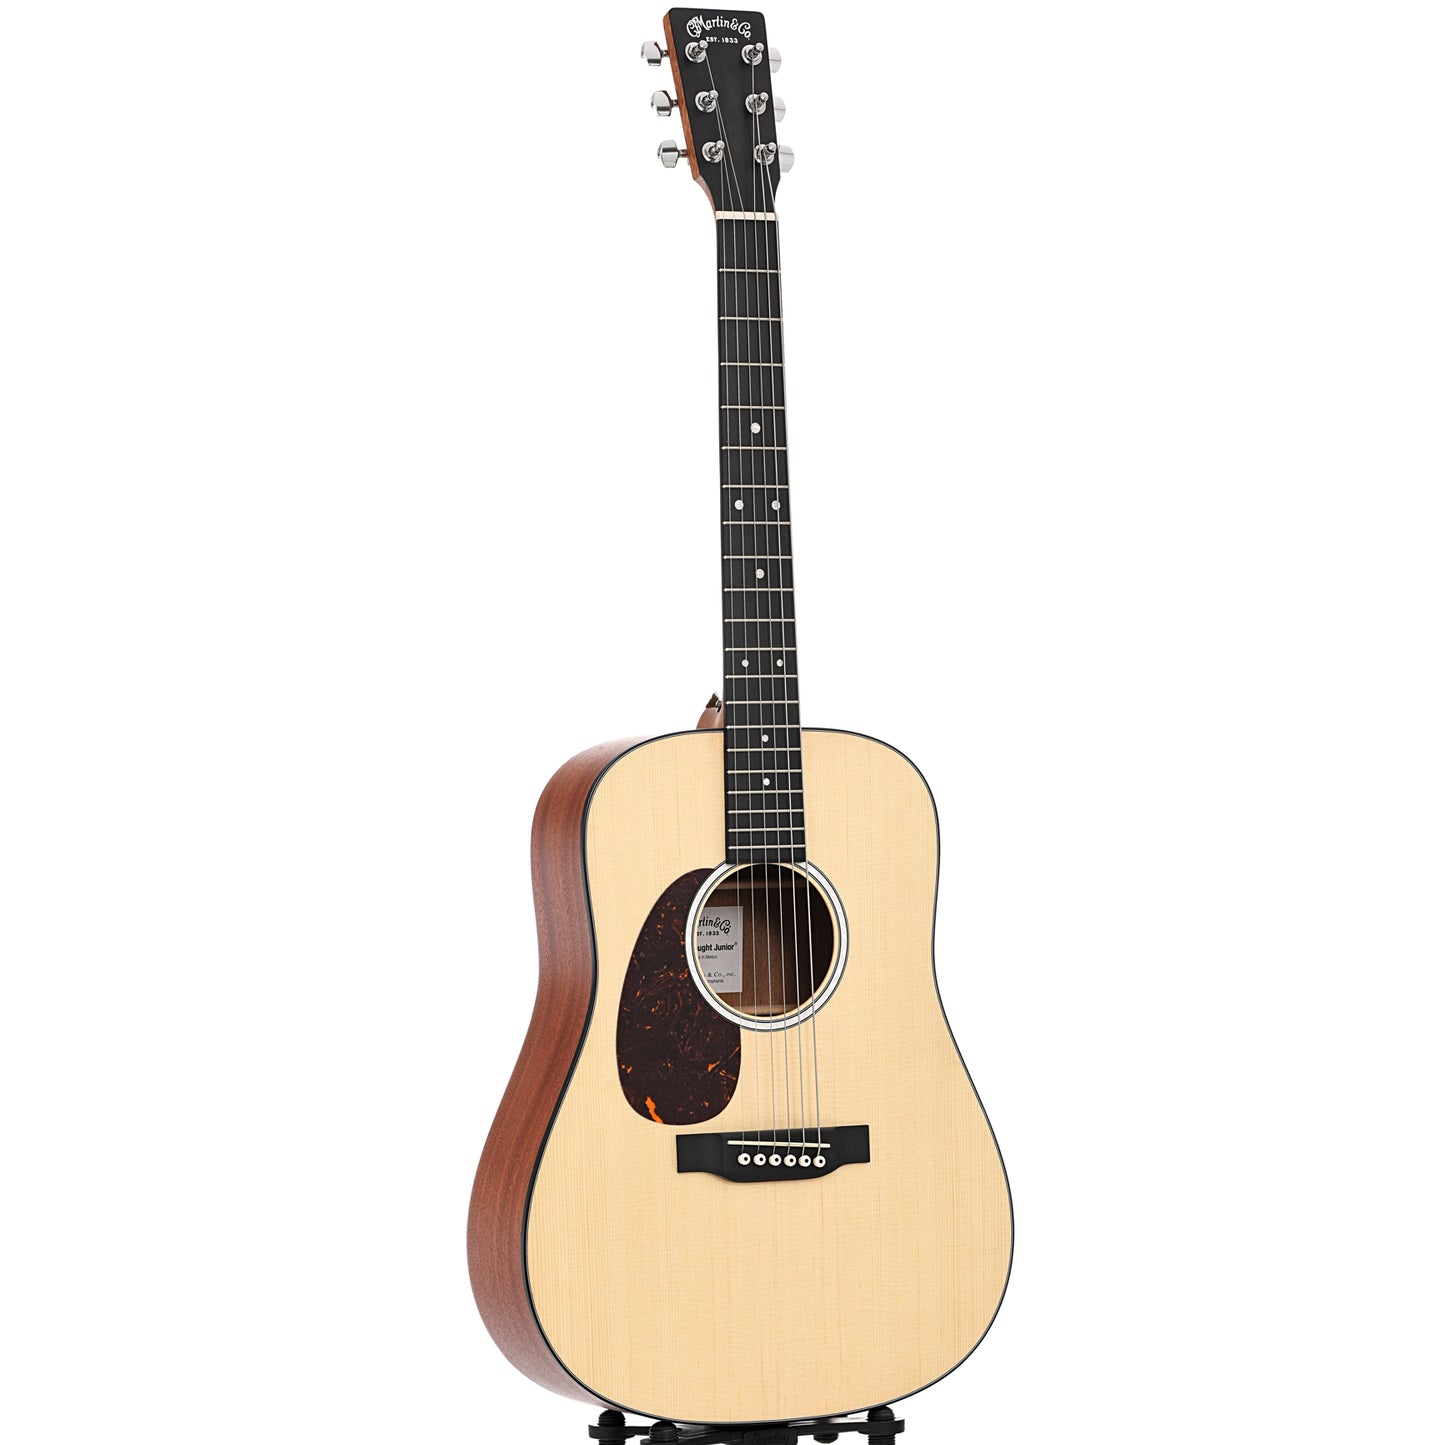 Full front and side of Martin DJR10L Lefthanded Dreadnought Junior